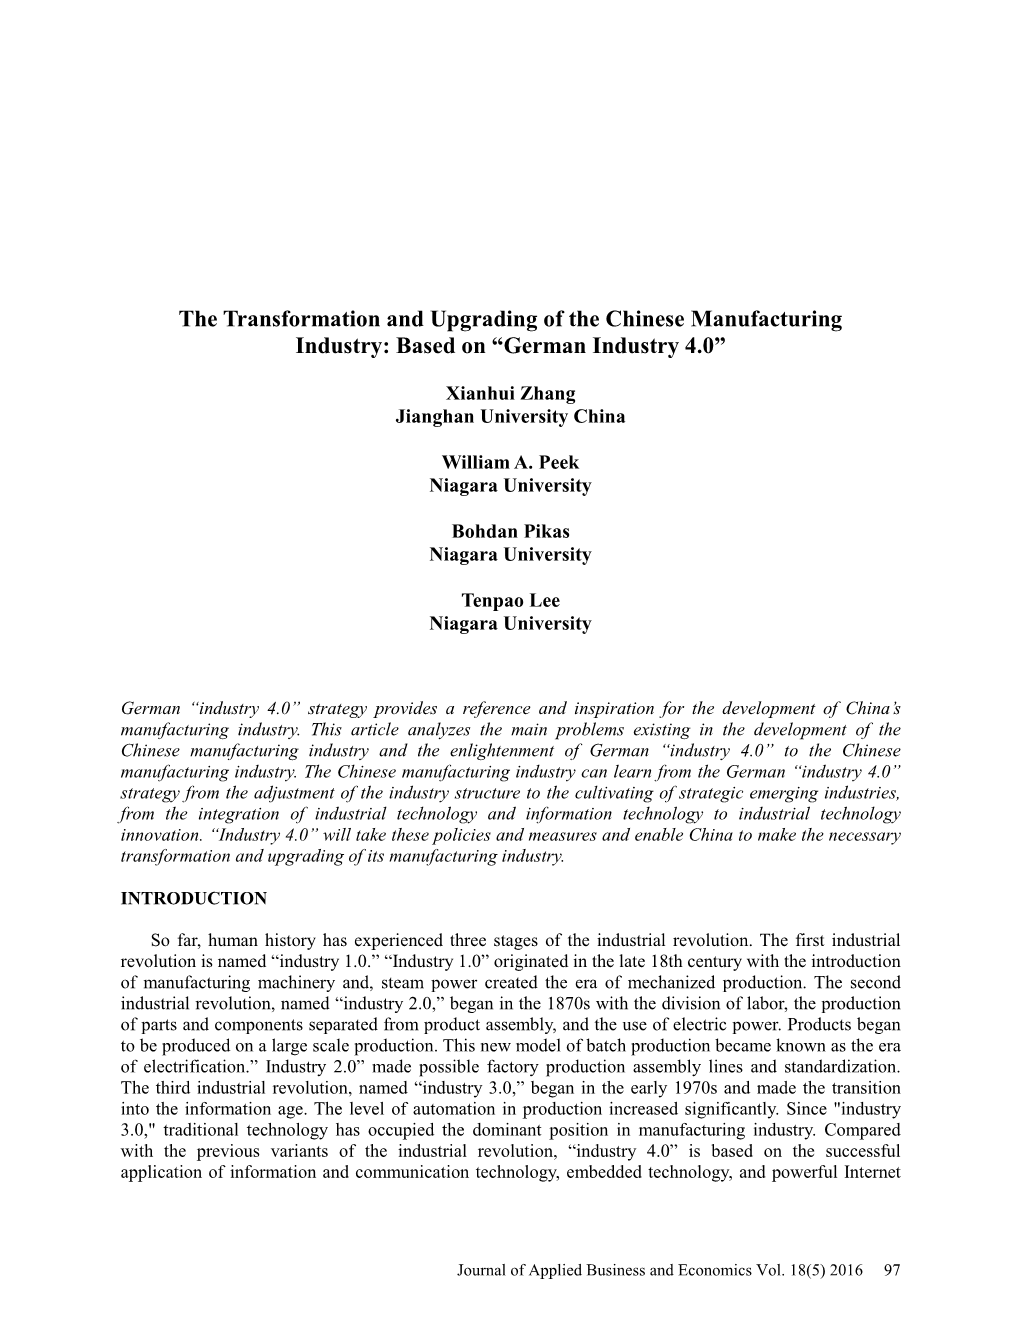 The Transformation and Upgrading of the Chinese Manufacturing Industry: Based on “German Industry 4.0”